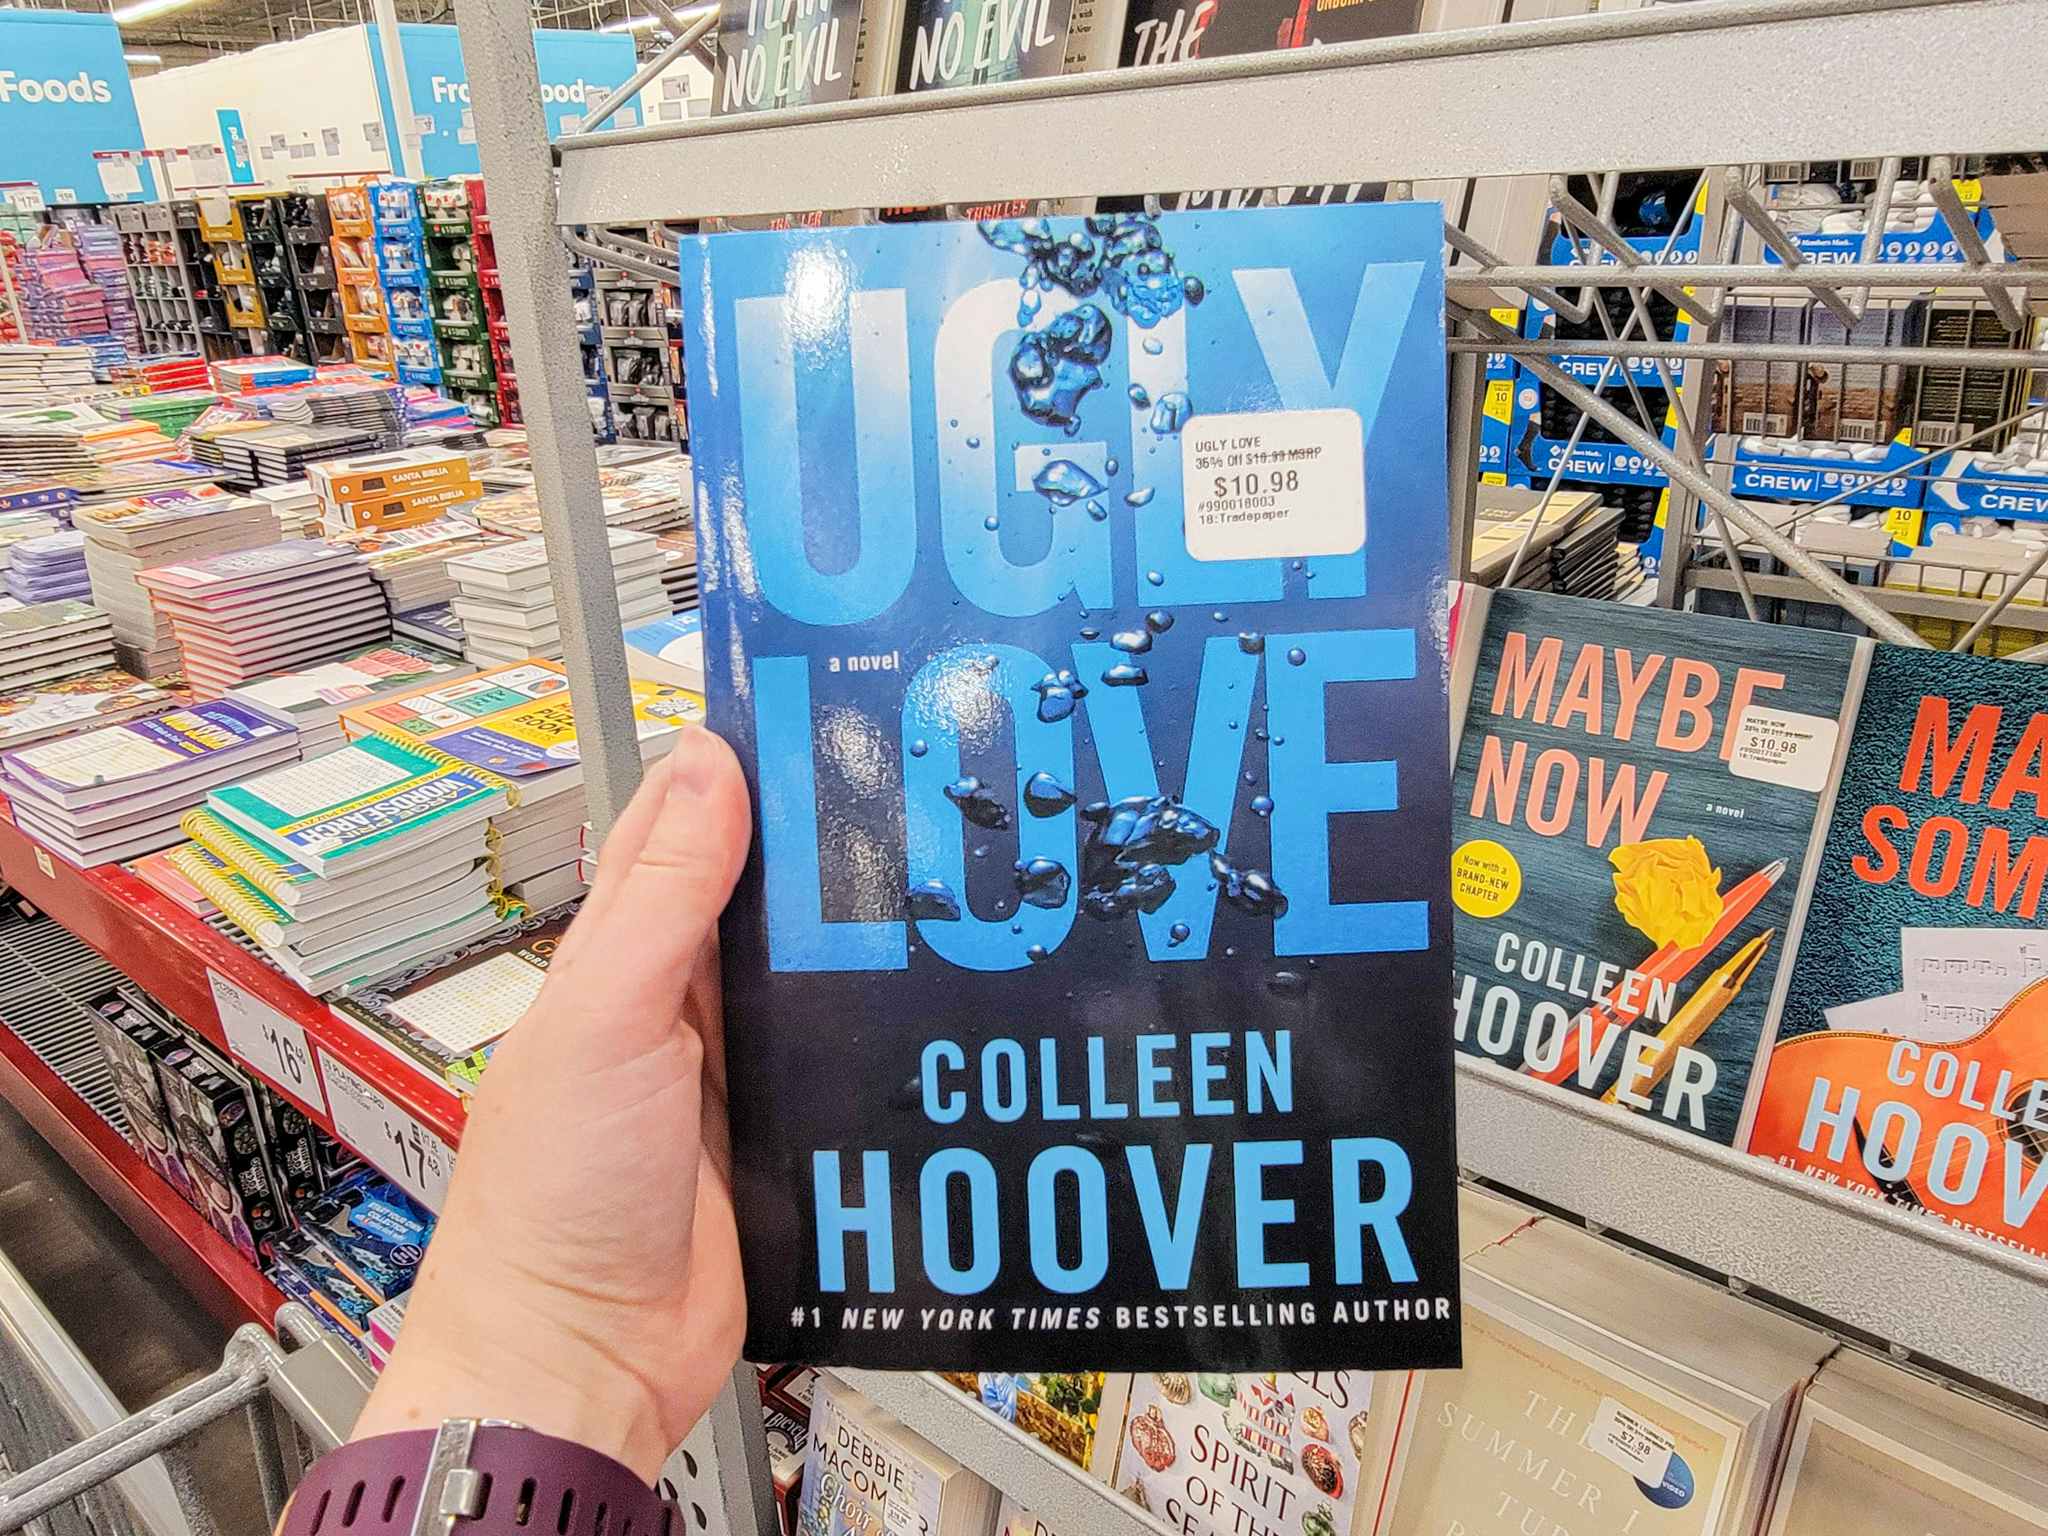 hand holding "ugly love" by colleen hoover